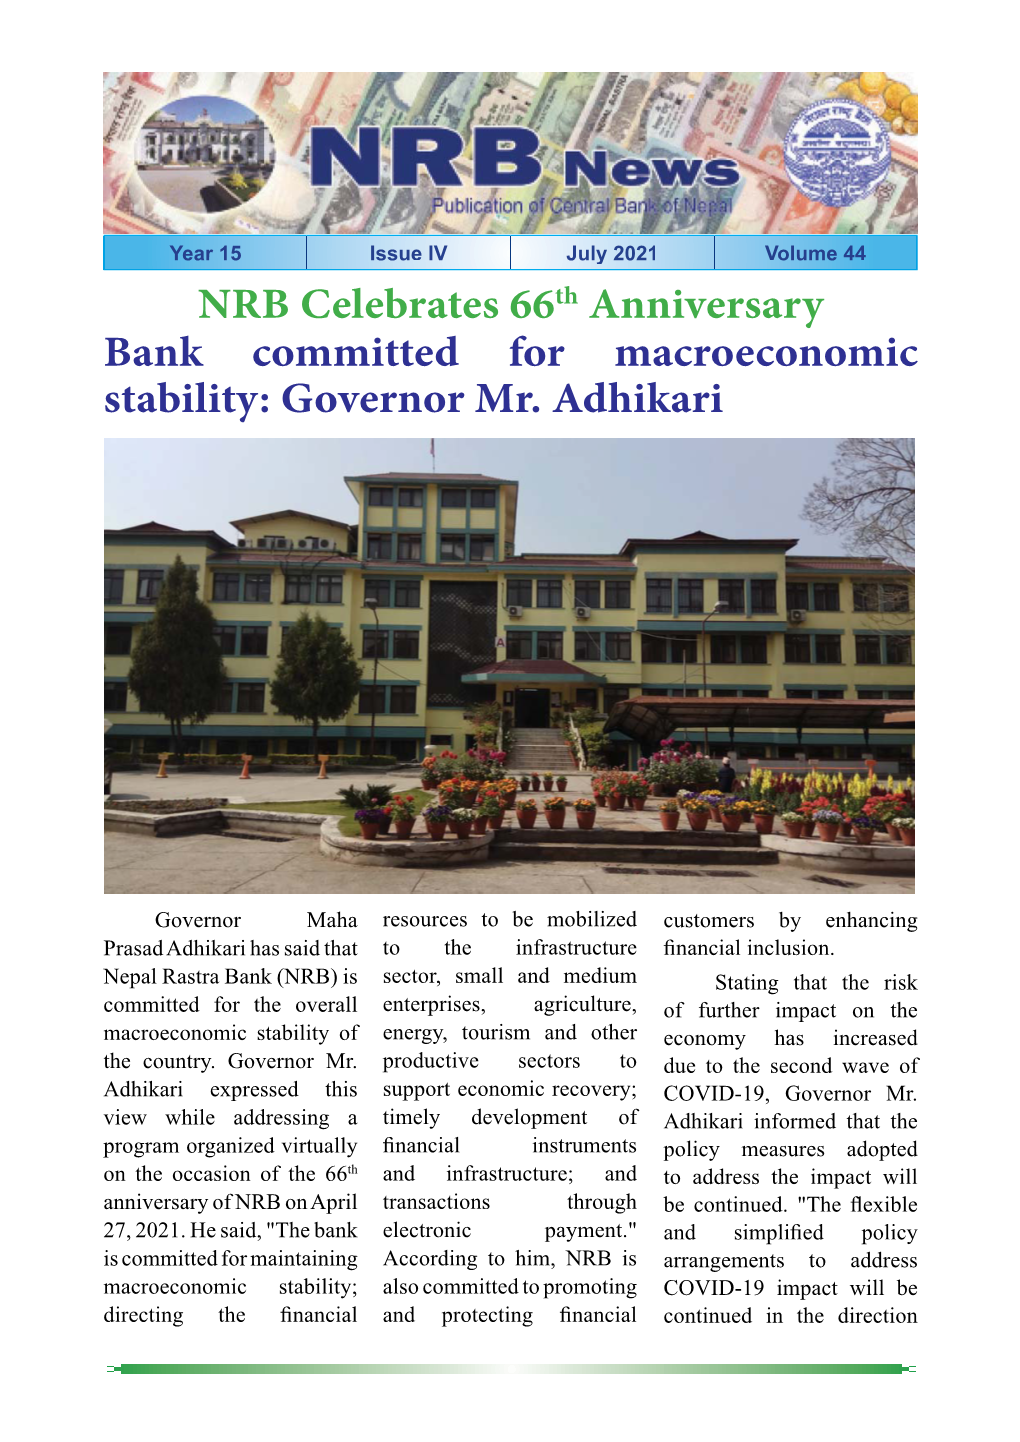 NRB News Year 15 Issue IV (July 2021)